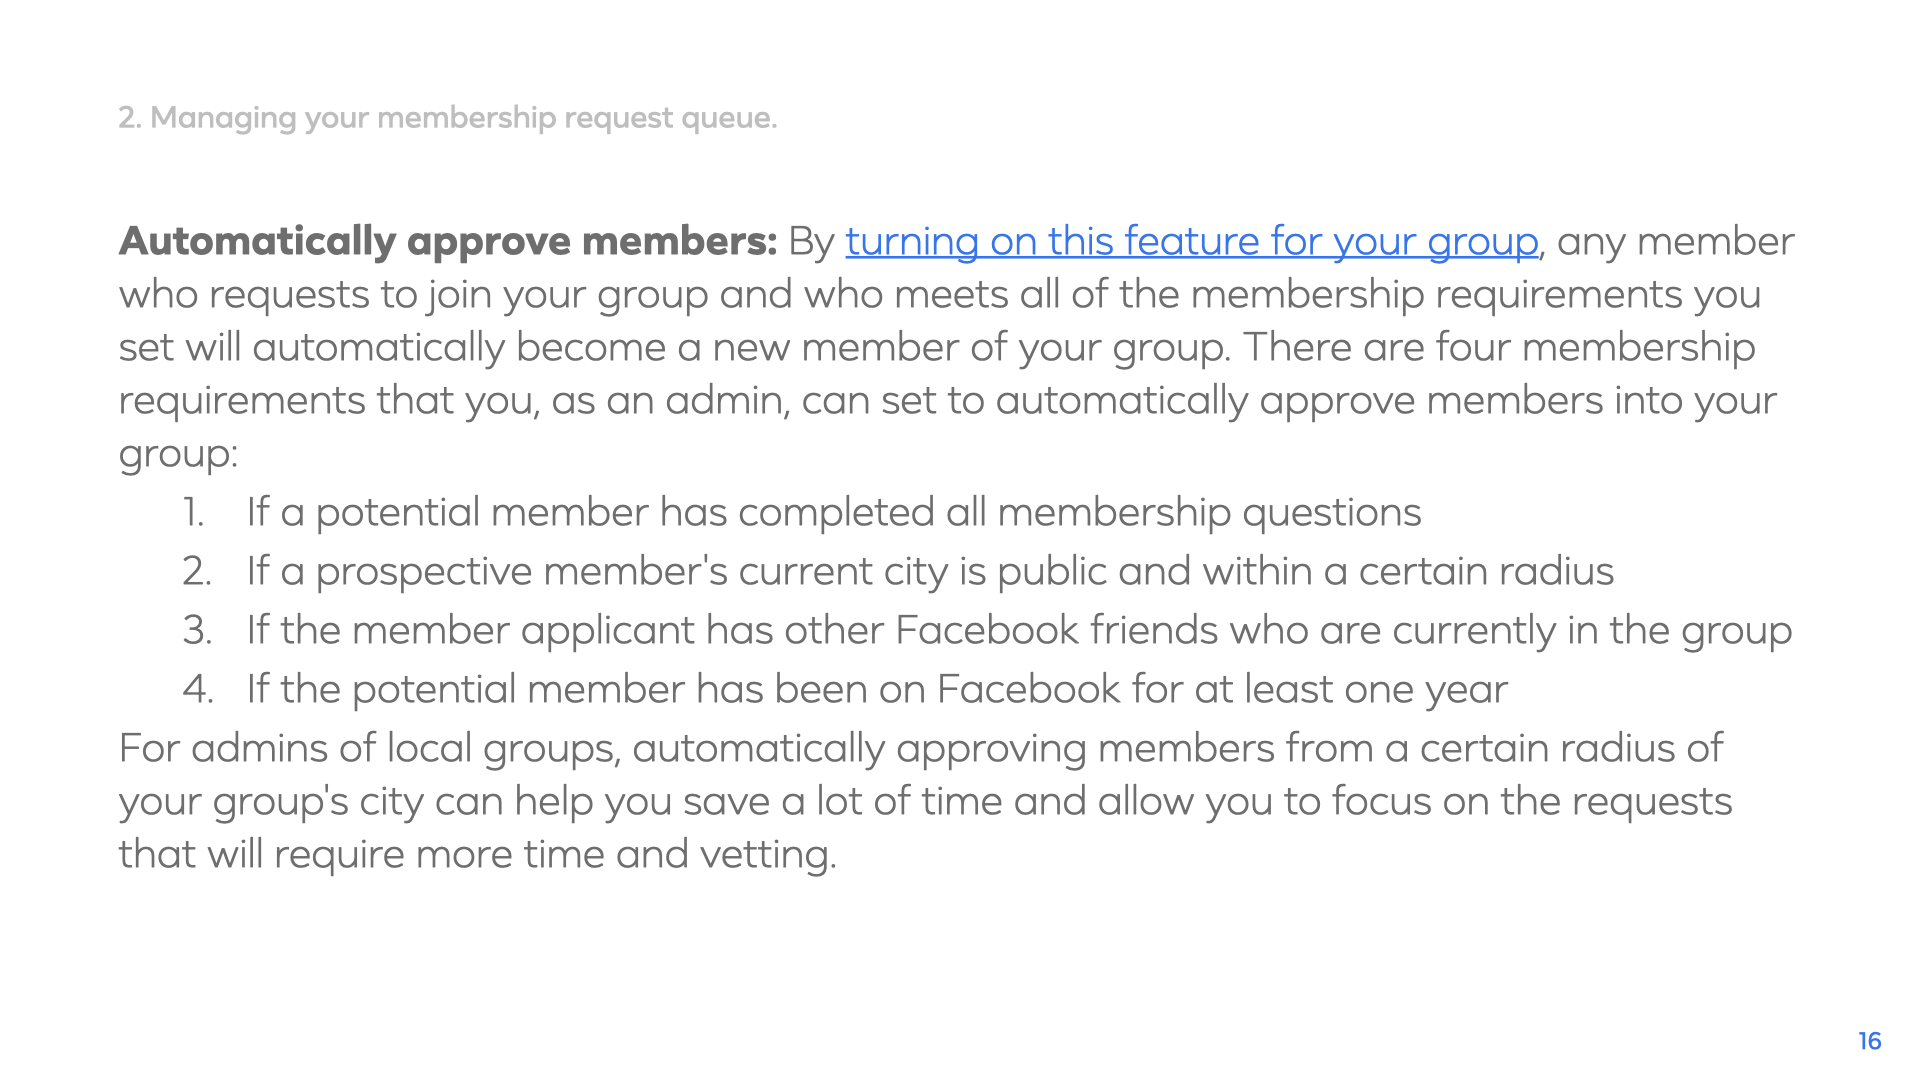 LocalGroups-Playbook.016.png